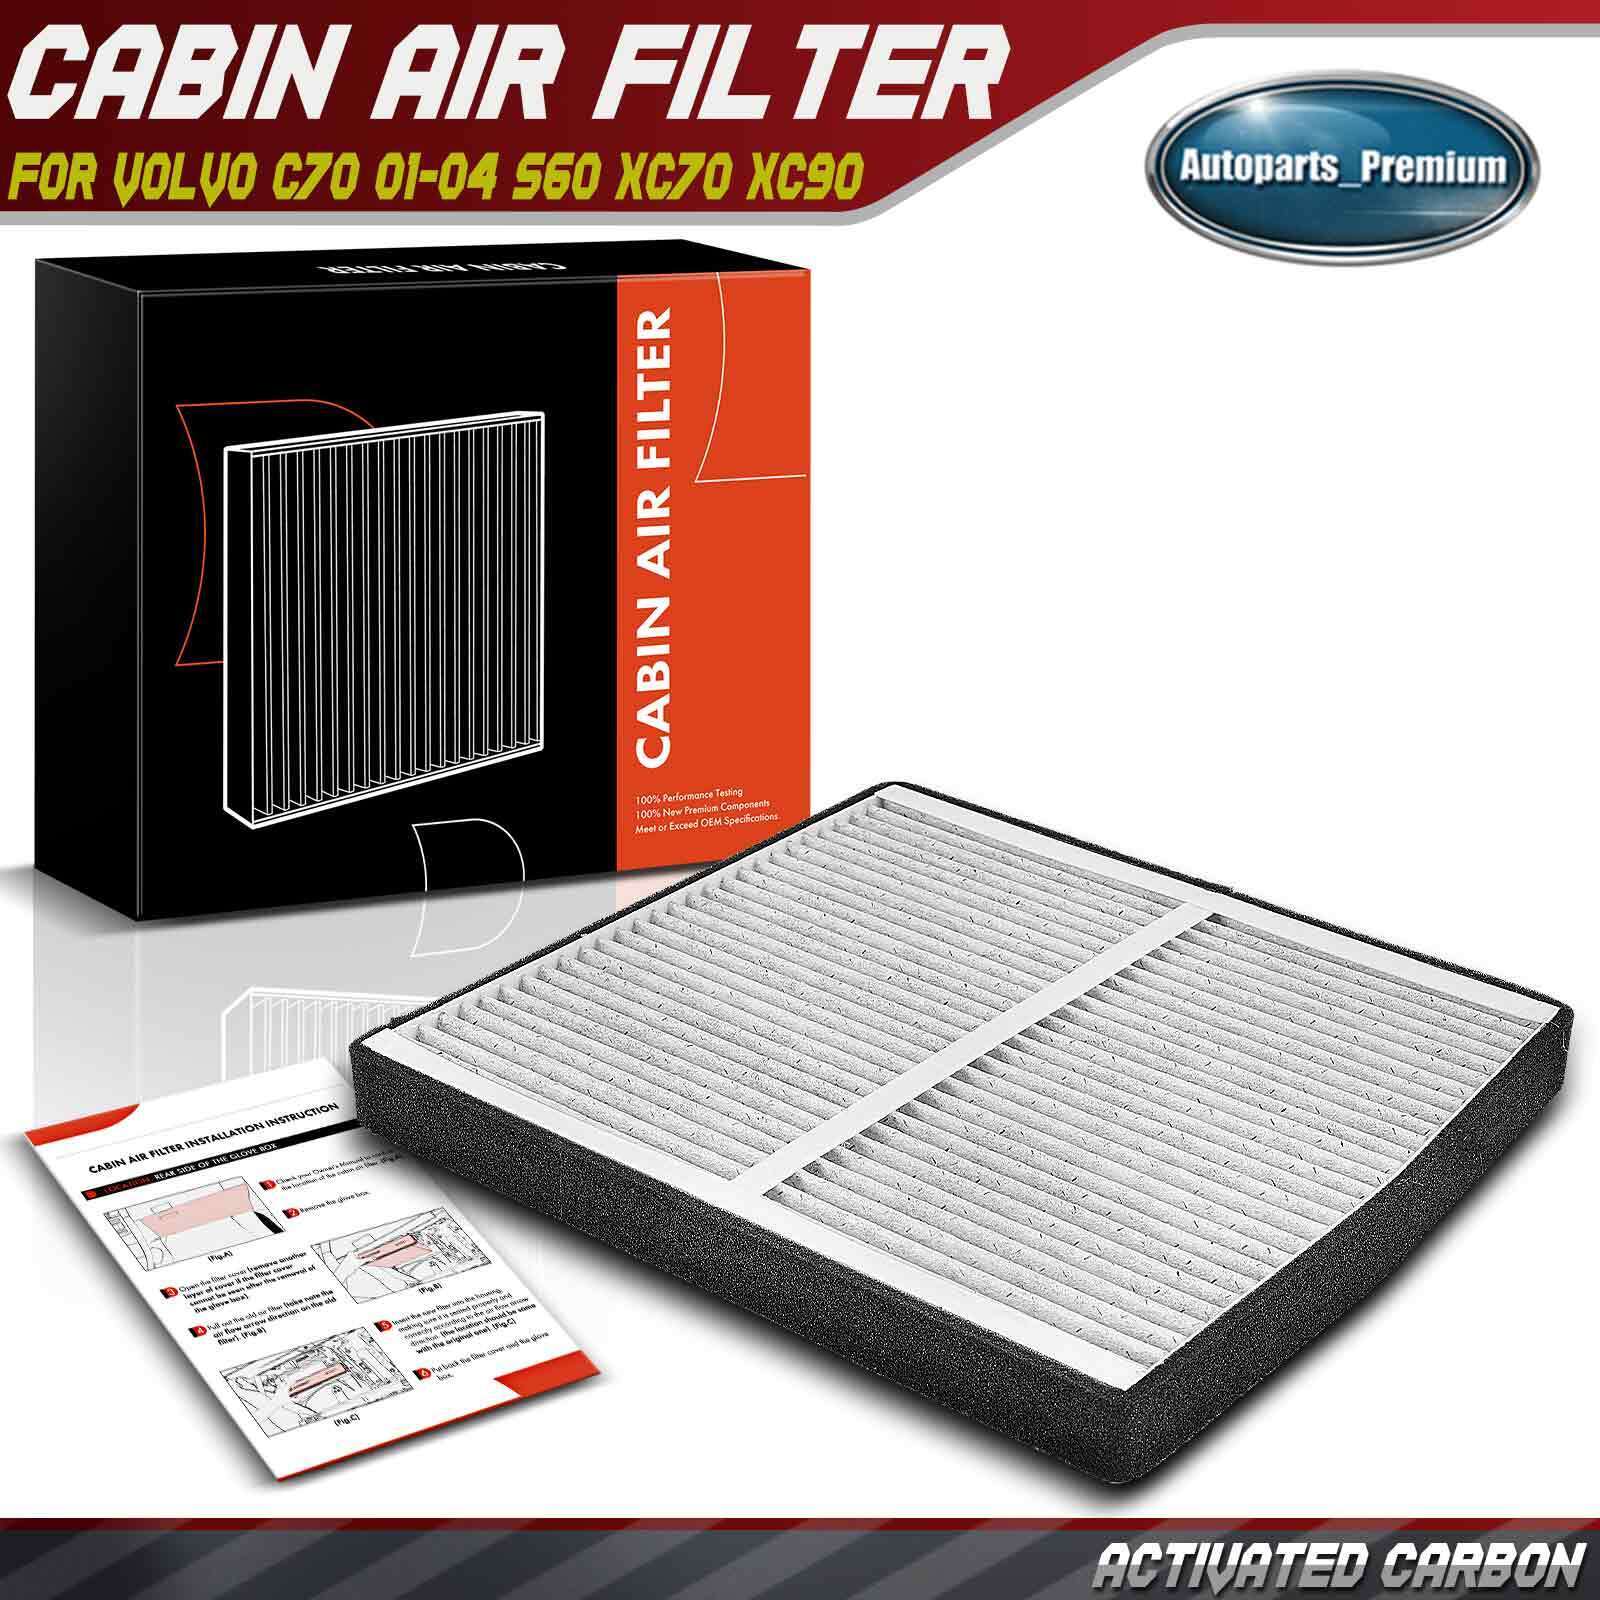 Activated Carbon Cabin Air Filter for Volvo C70 01-04 S60 XC70 Under Glove Box